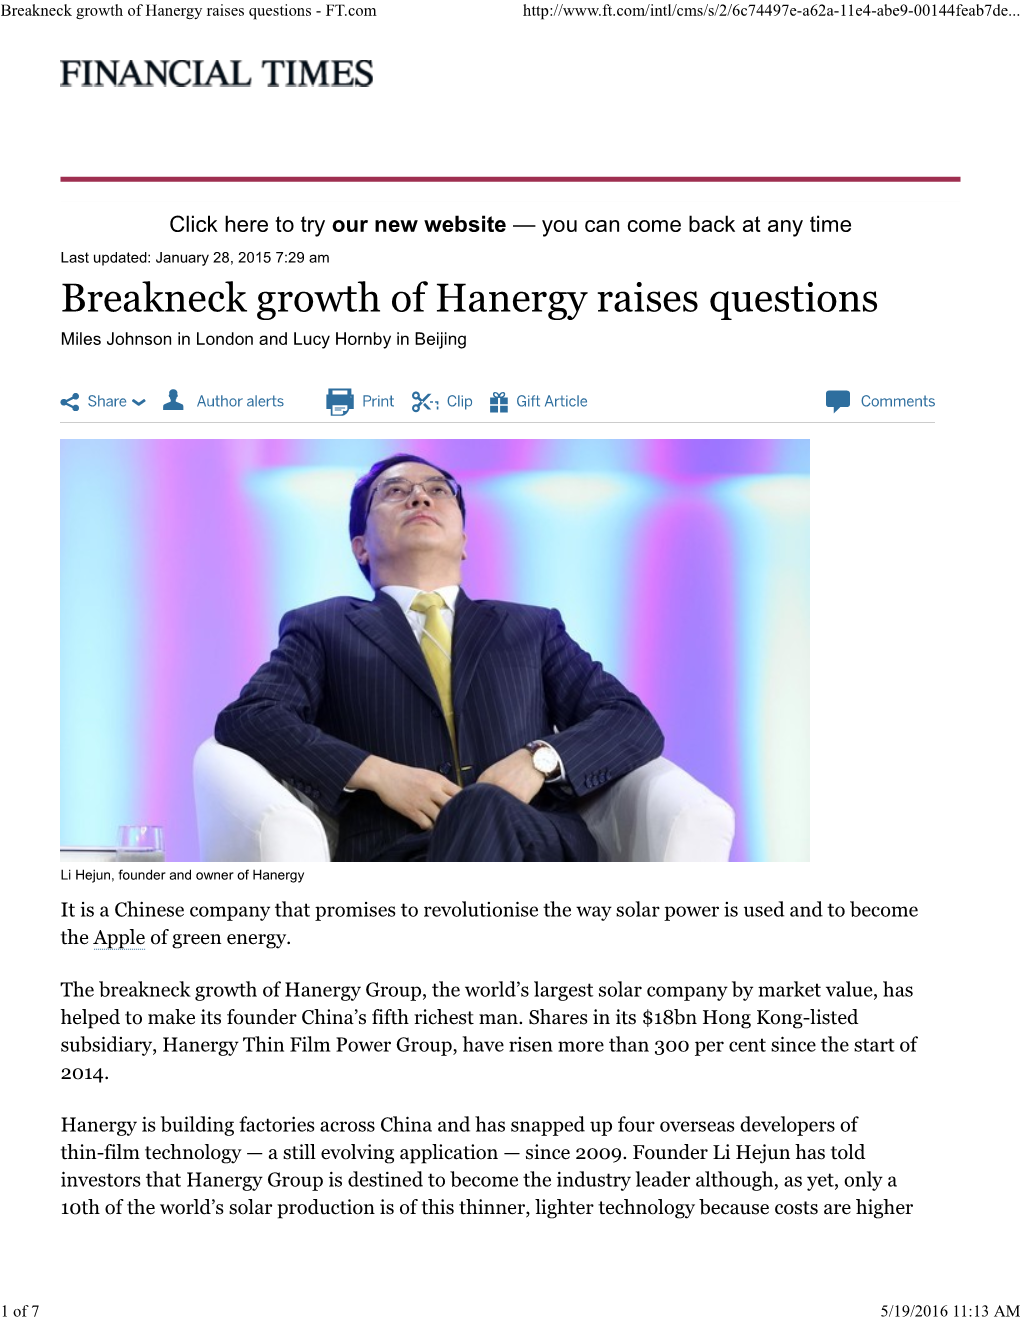 Breakneck Growth of Hanergy Raises Questions - FT.Com